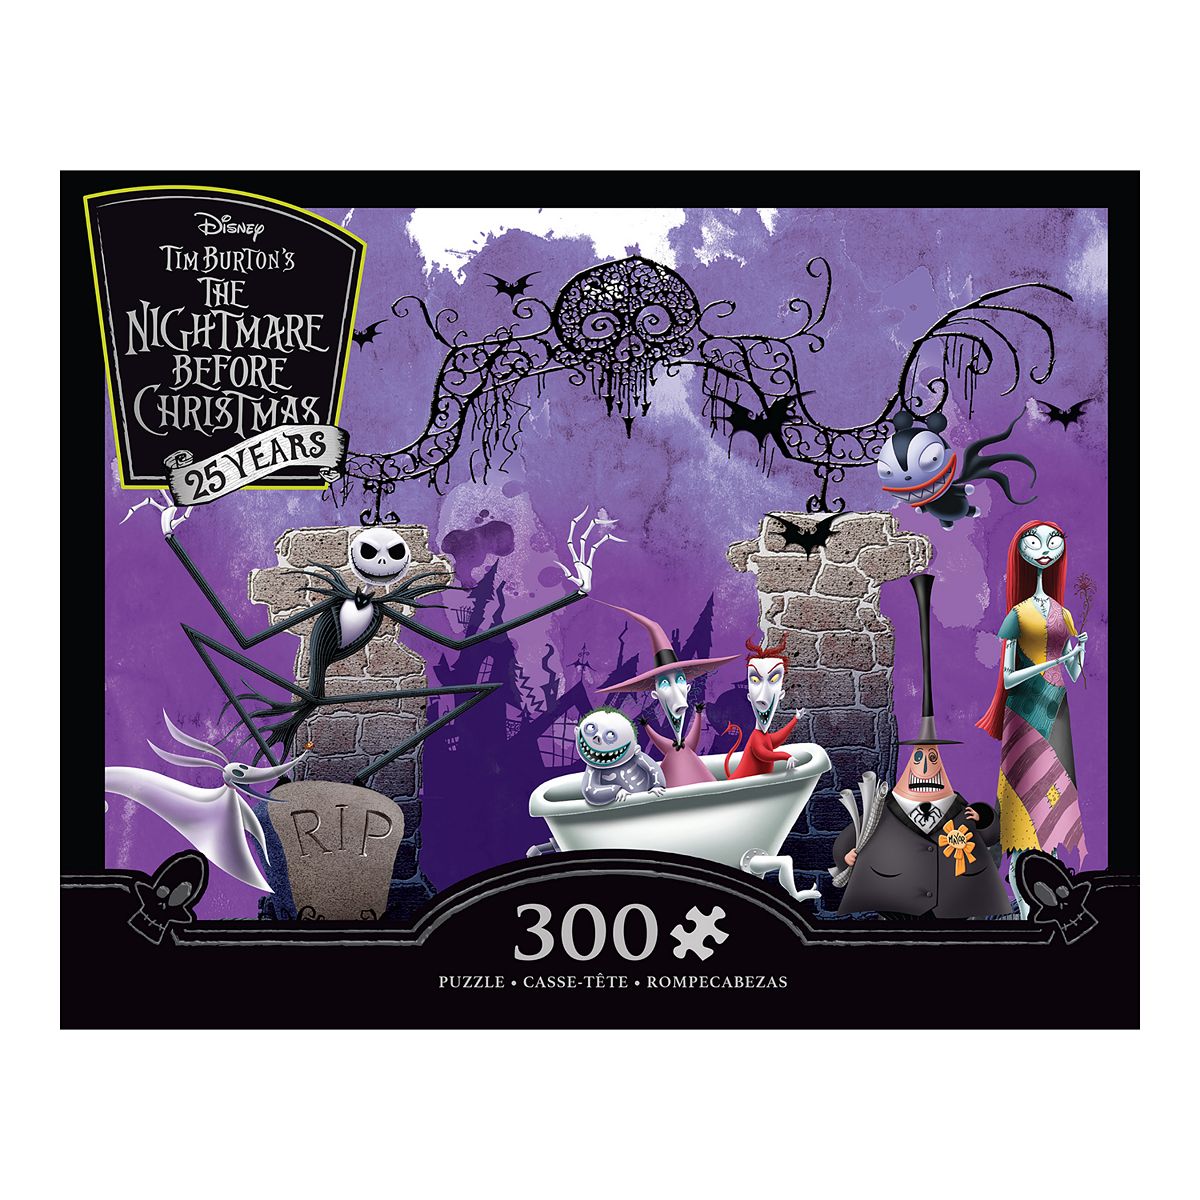 The Nightmare Before Christmas Characters Puzzle